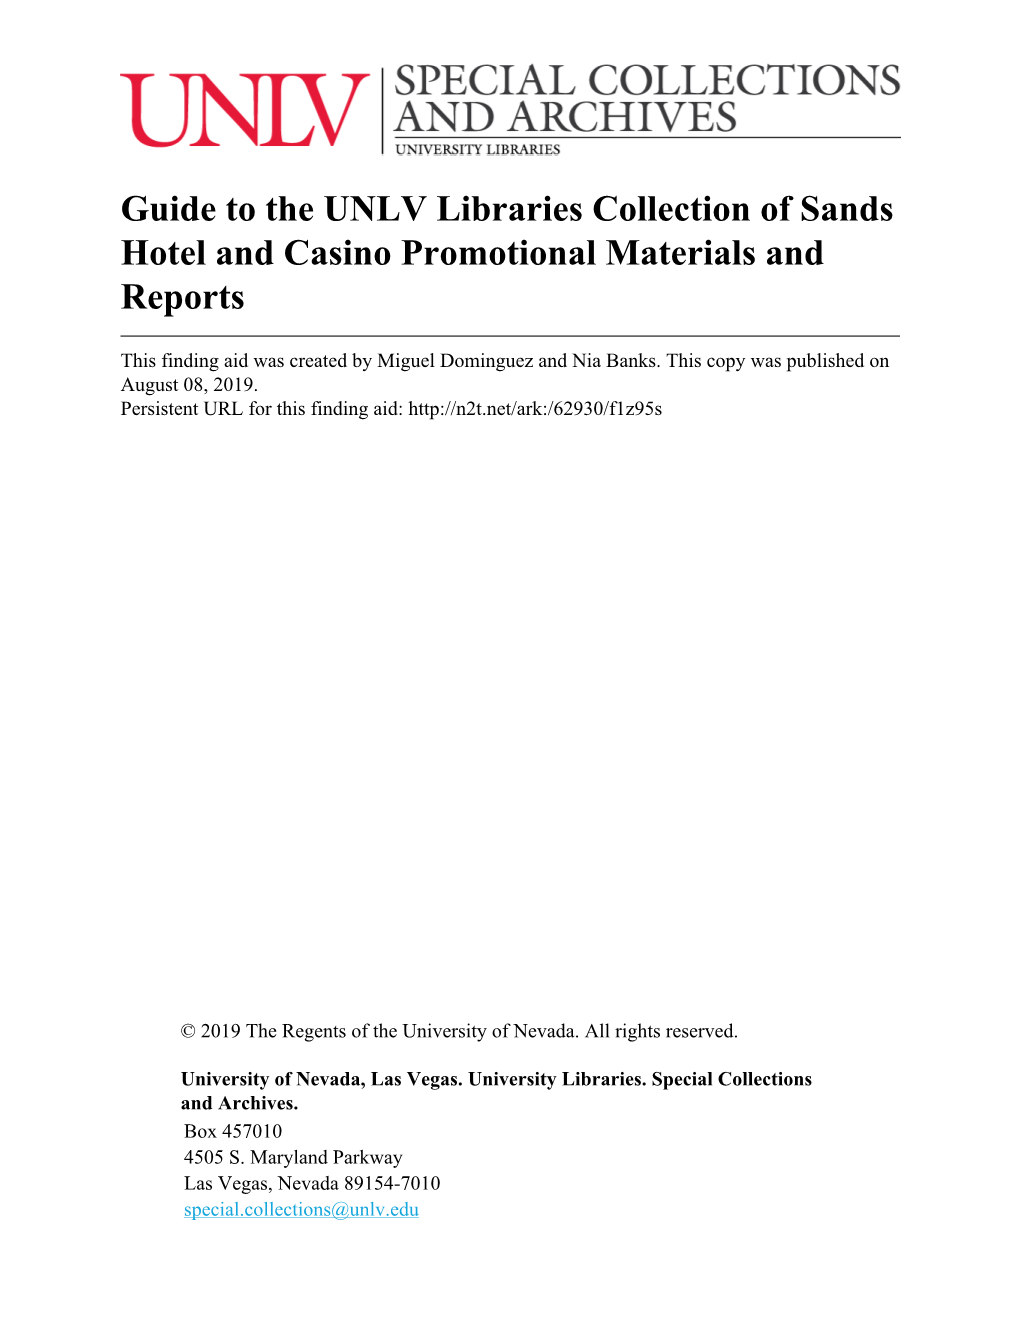 Guide to the UNLV Libraries Collection of Sands Hotel and Casino Promotional Materials and Reports